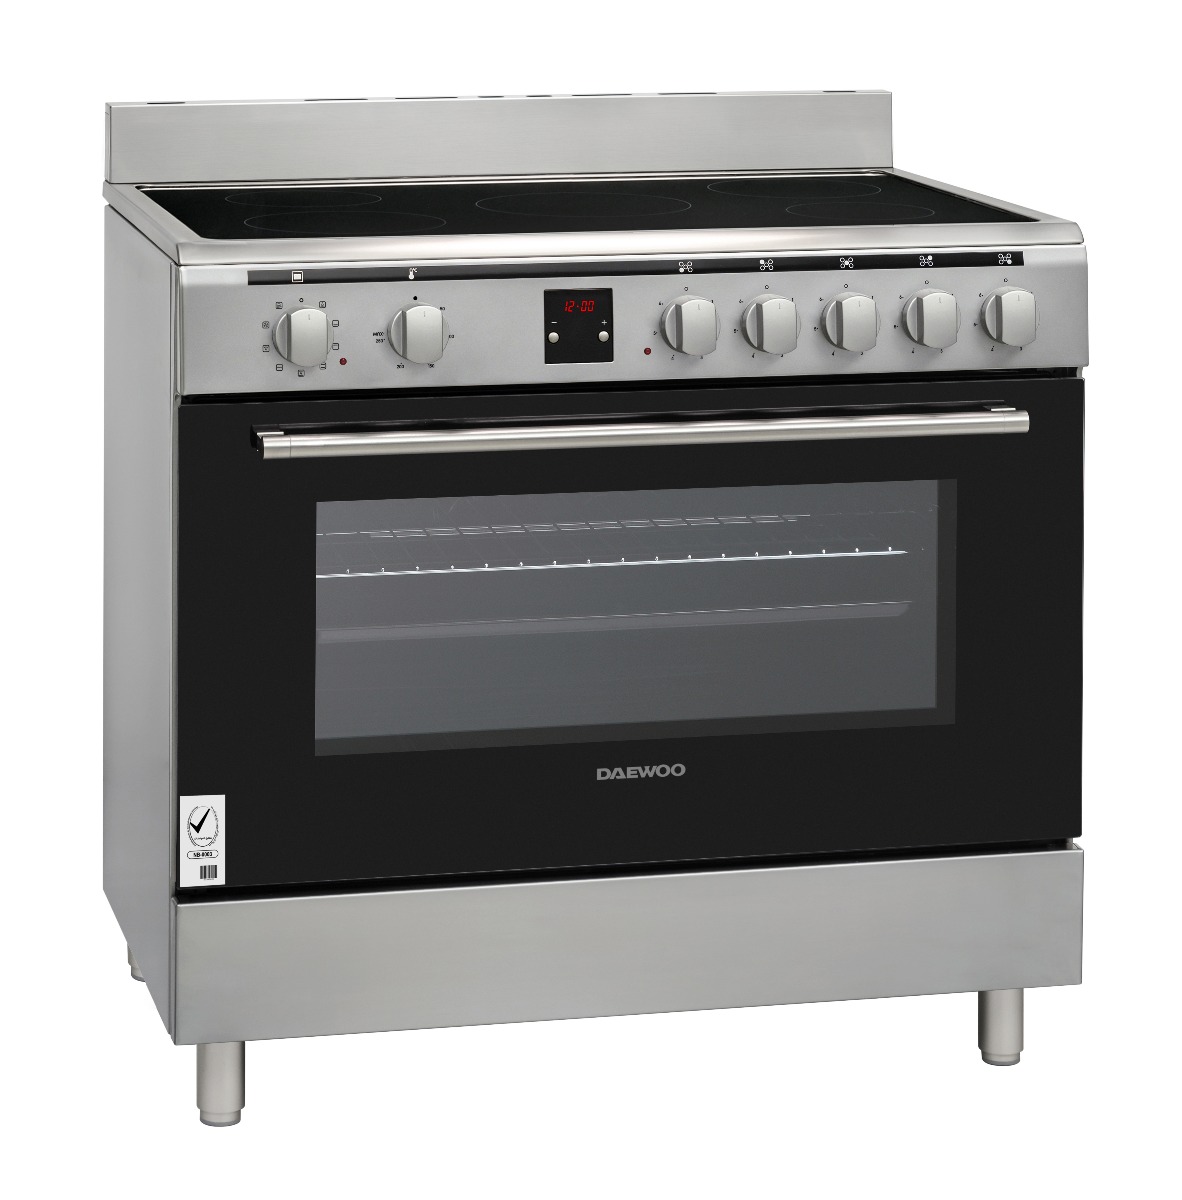 Picture of Daewoo - Ceramic Cooker 90*60cm | 90L Electric Oven With Convection Fan